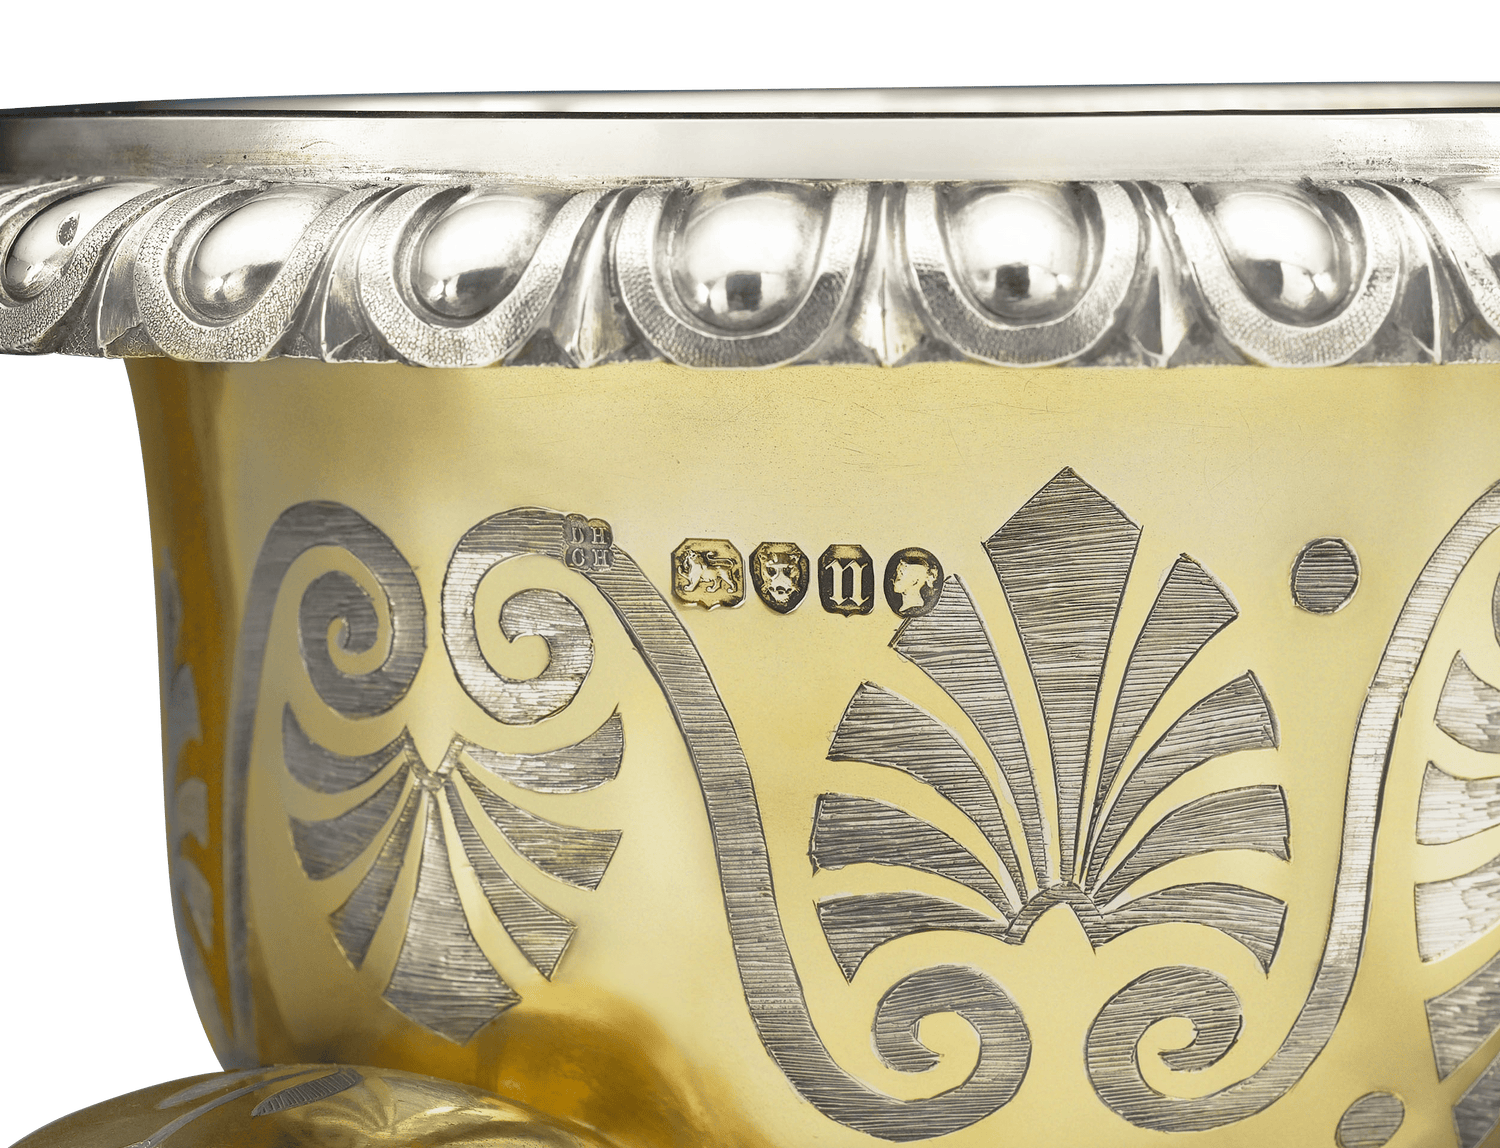 Hallmarks are clearly visible on the amphora-style vase